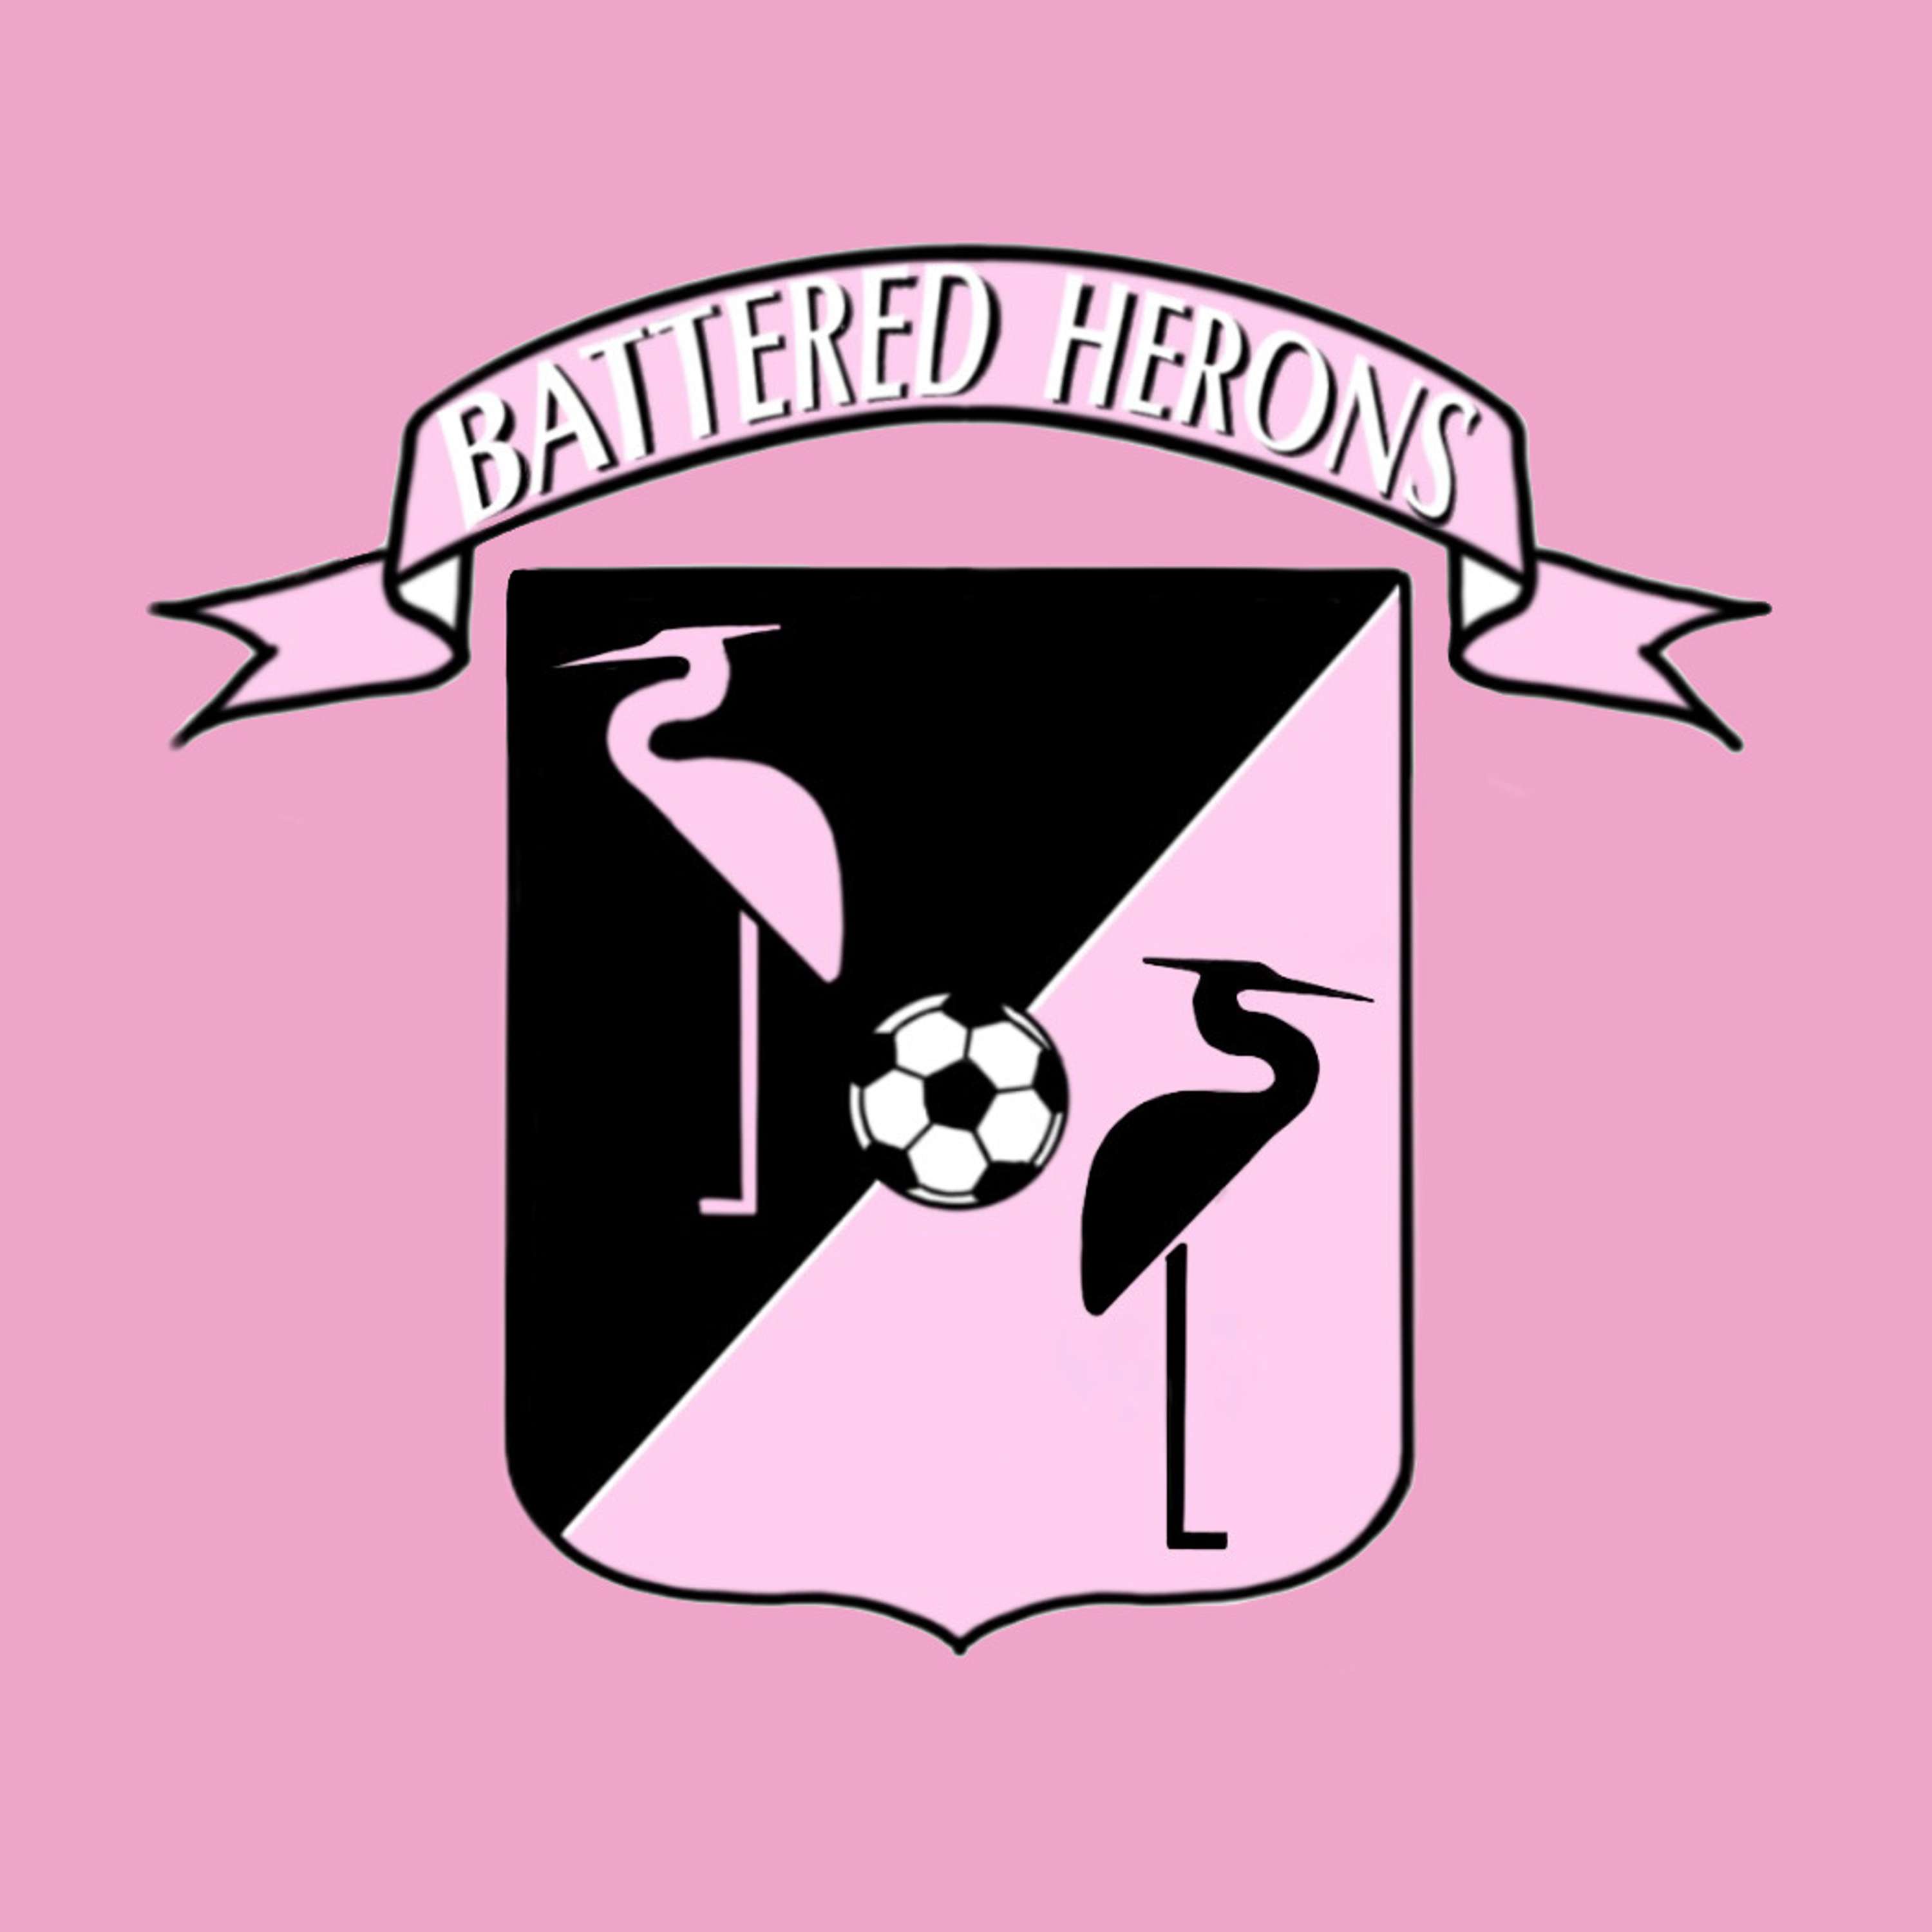 Battered Herons: An Inter Miami Podcast podcast show image